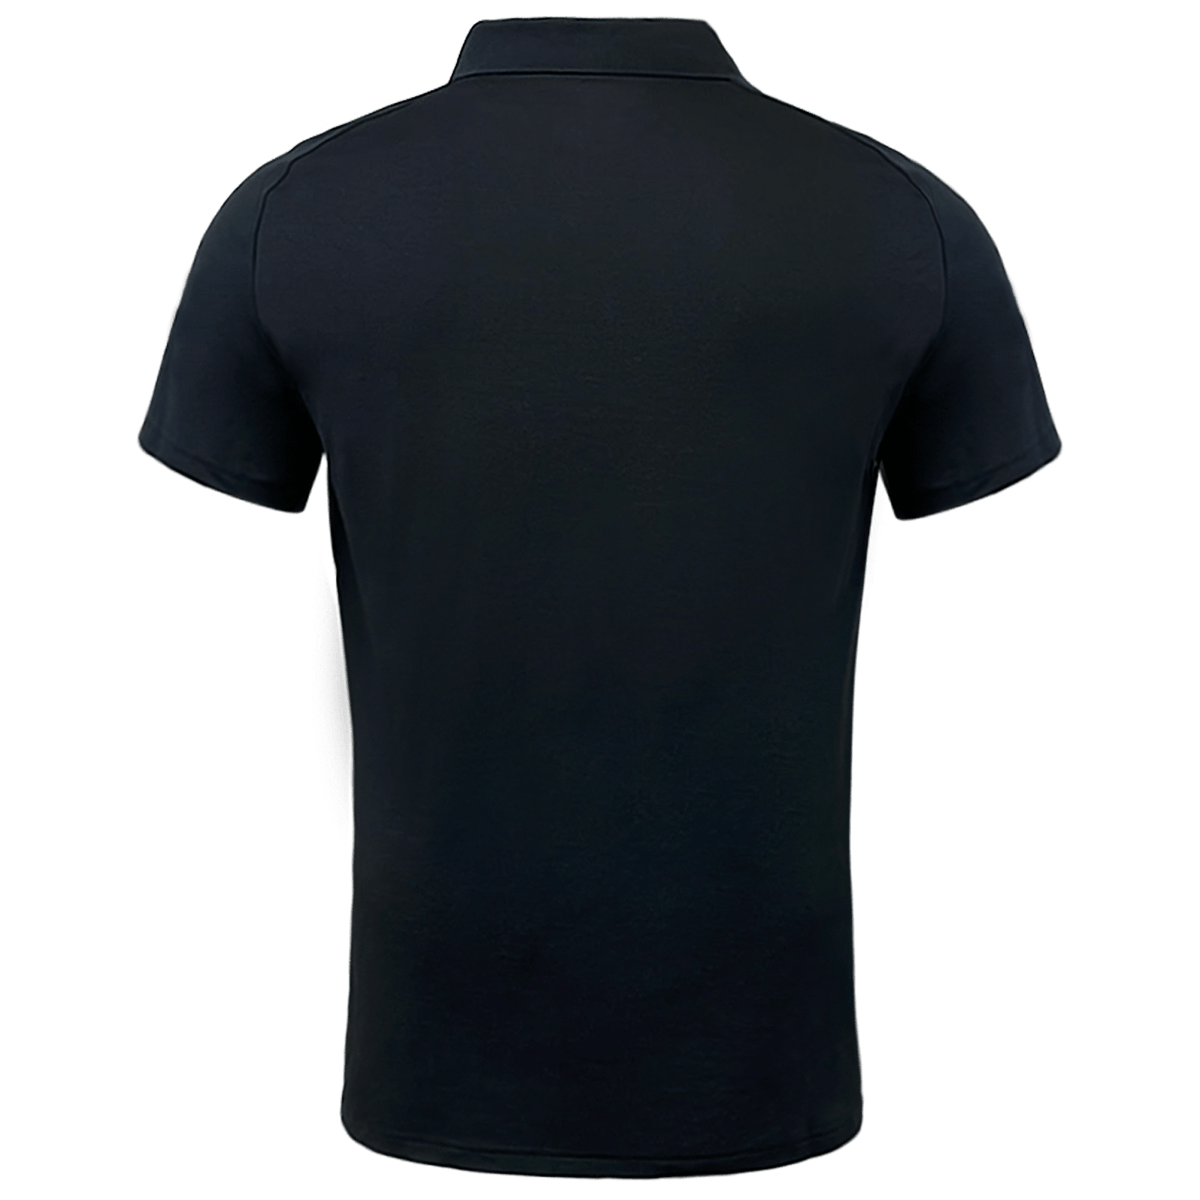 All Blacks Rugby Polo by adidas 22/23 | World Rugby Shop